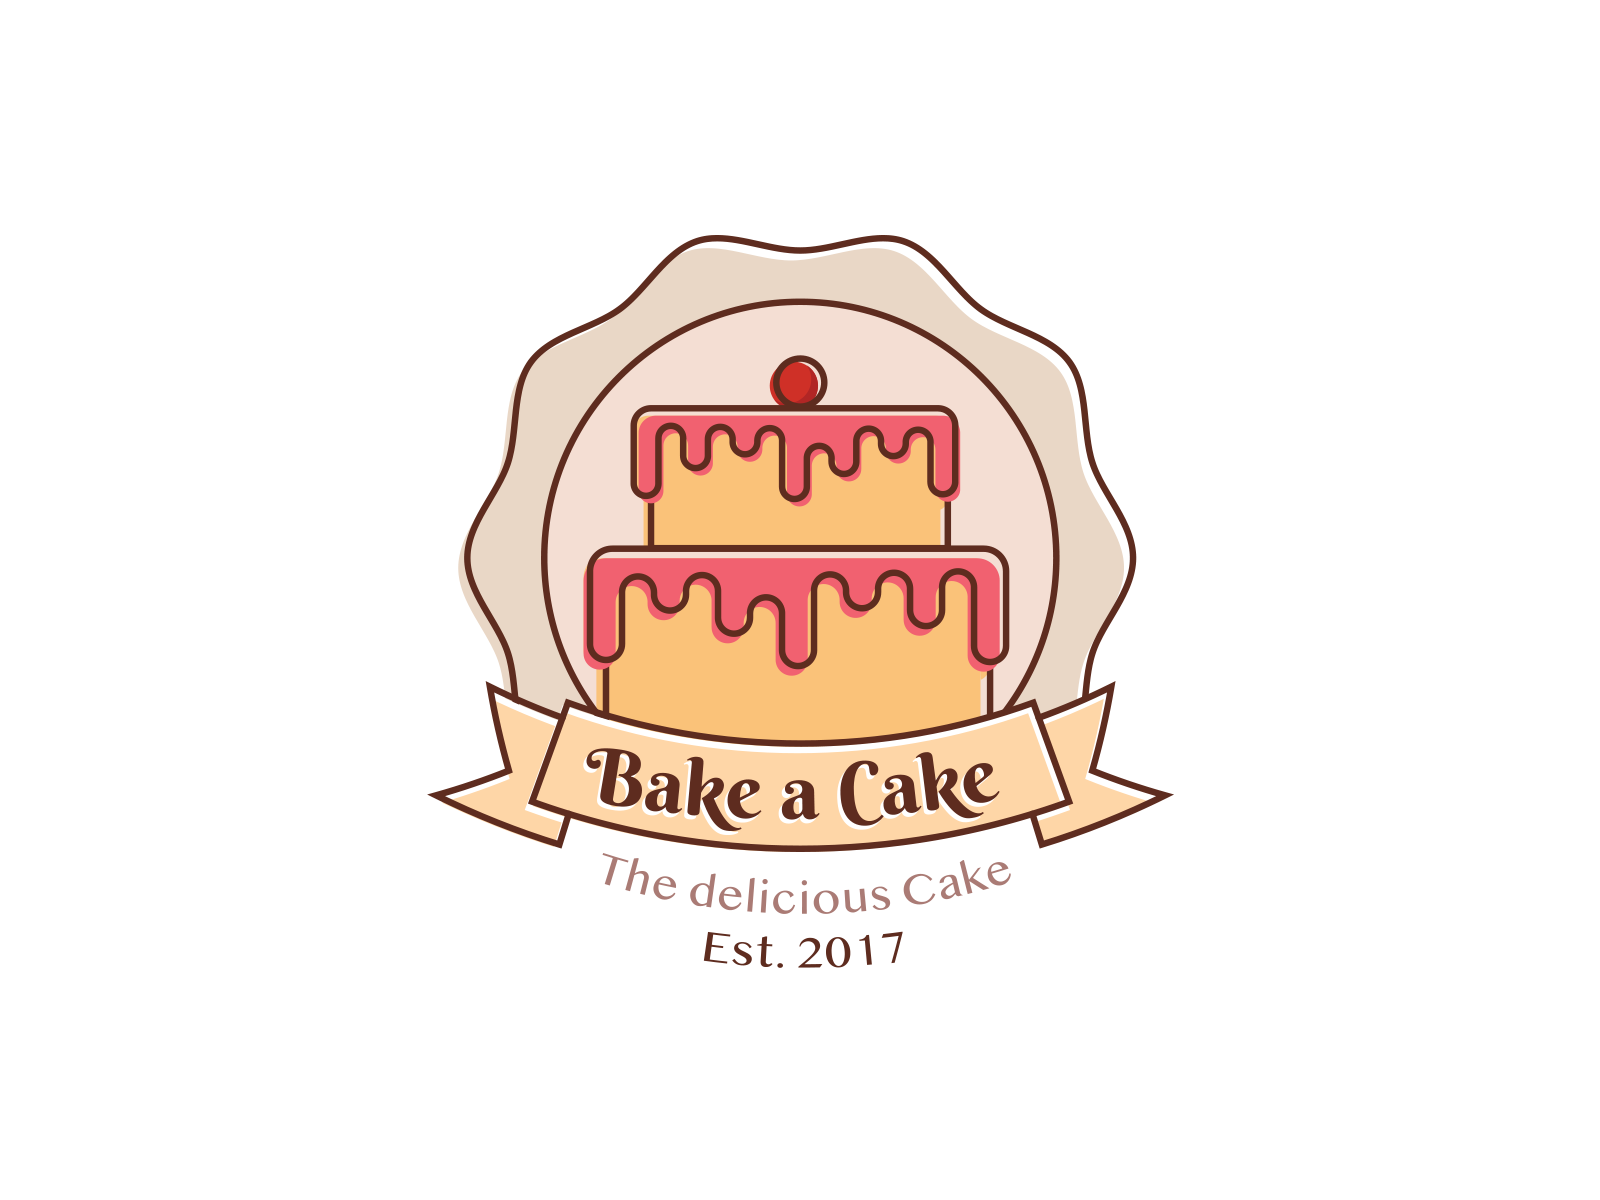 Cake Watercolor Clipart. Sweets Clipart. Wedding Cake Clipart. Fruit Cake.  Birthday Cake Clipart. Cake Logo Design. Bakery Clipart. PNG - Etsy